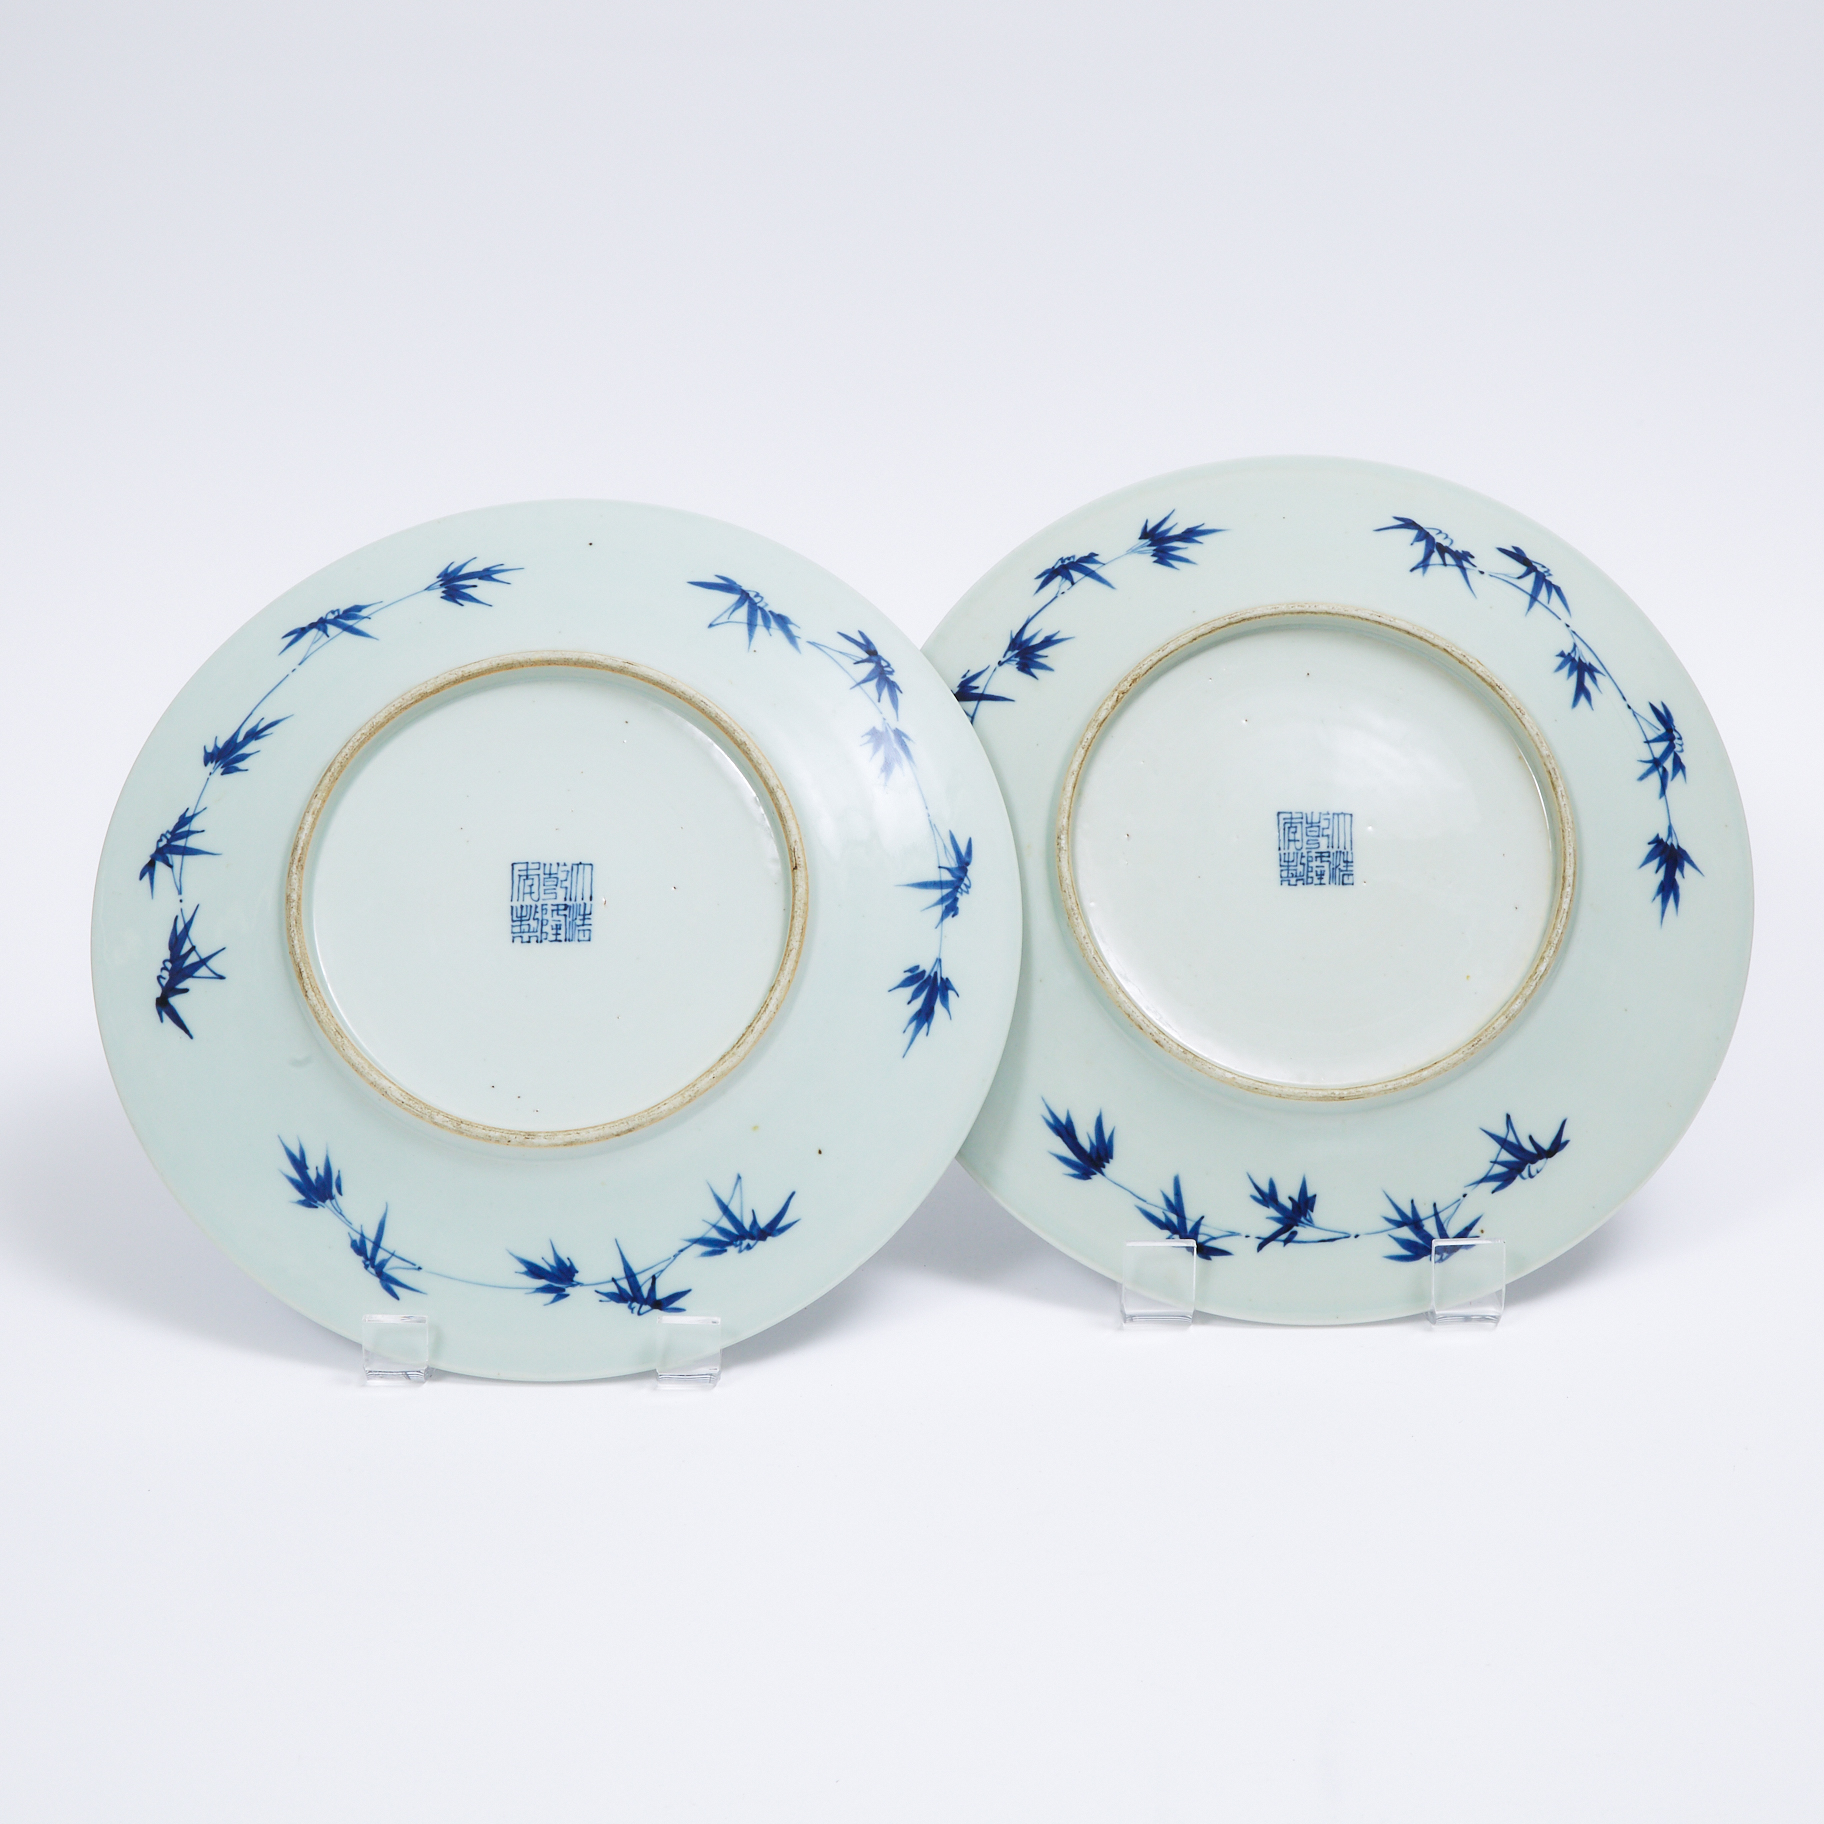 A Pair of Blue and White 'Phoenix' Chargers, Qianlong Mark, 19th Century